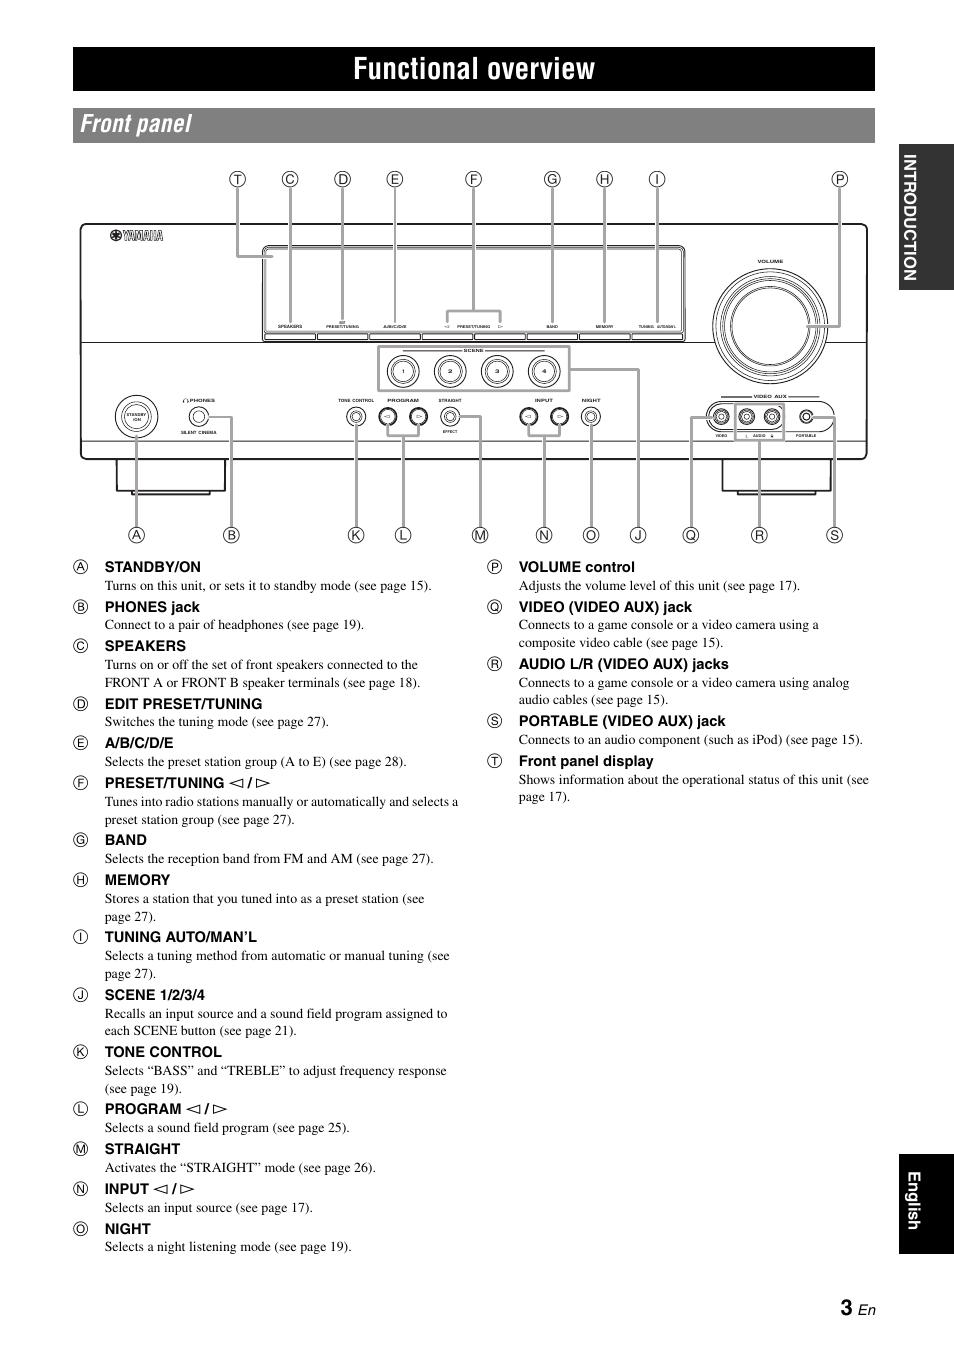 Functional overview, Front panel | Yamaha RX-V365 User Manual | Page 7 ...